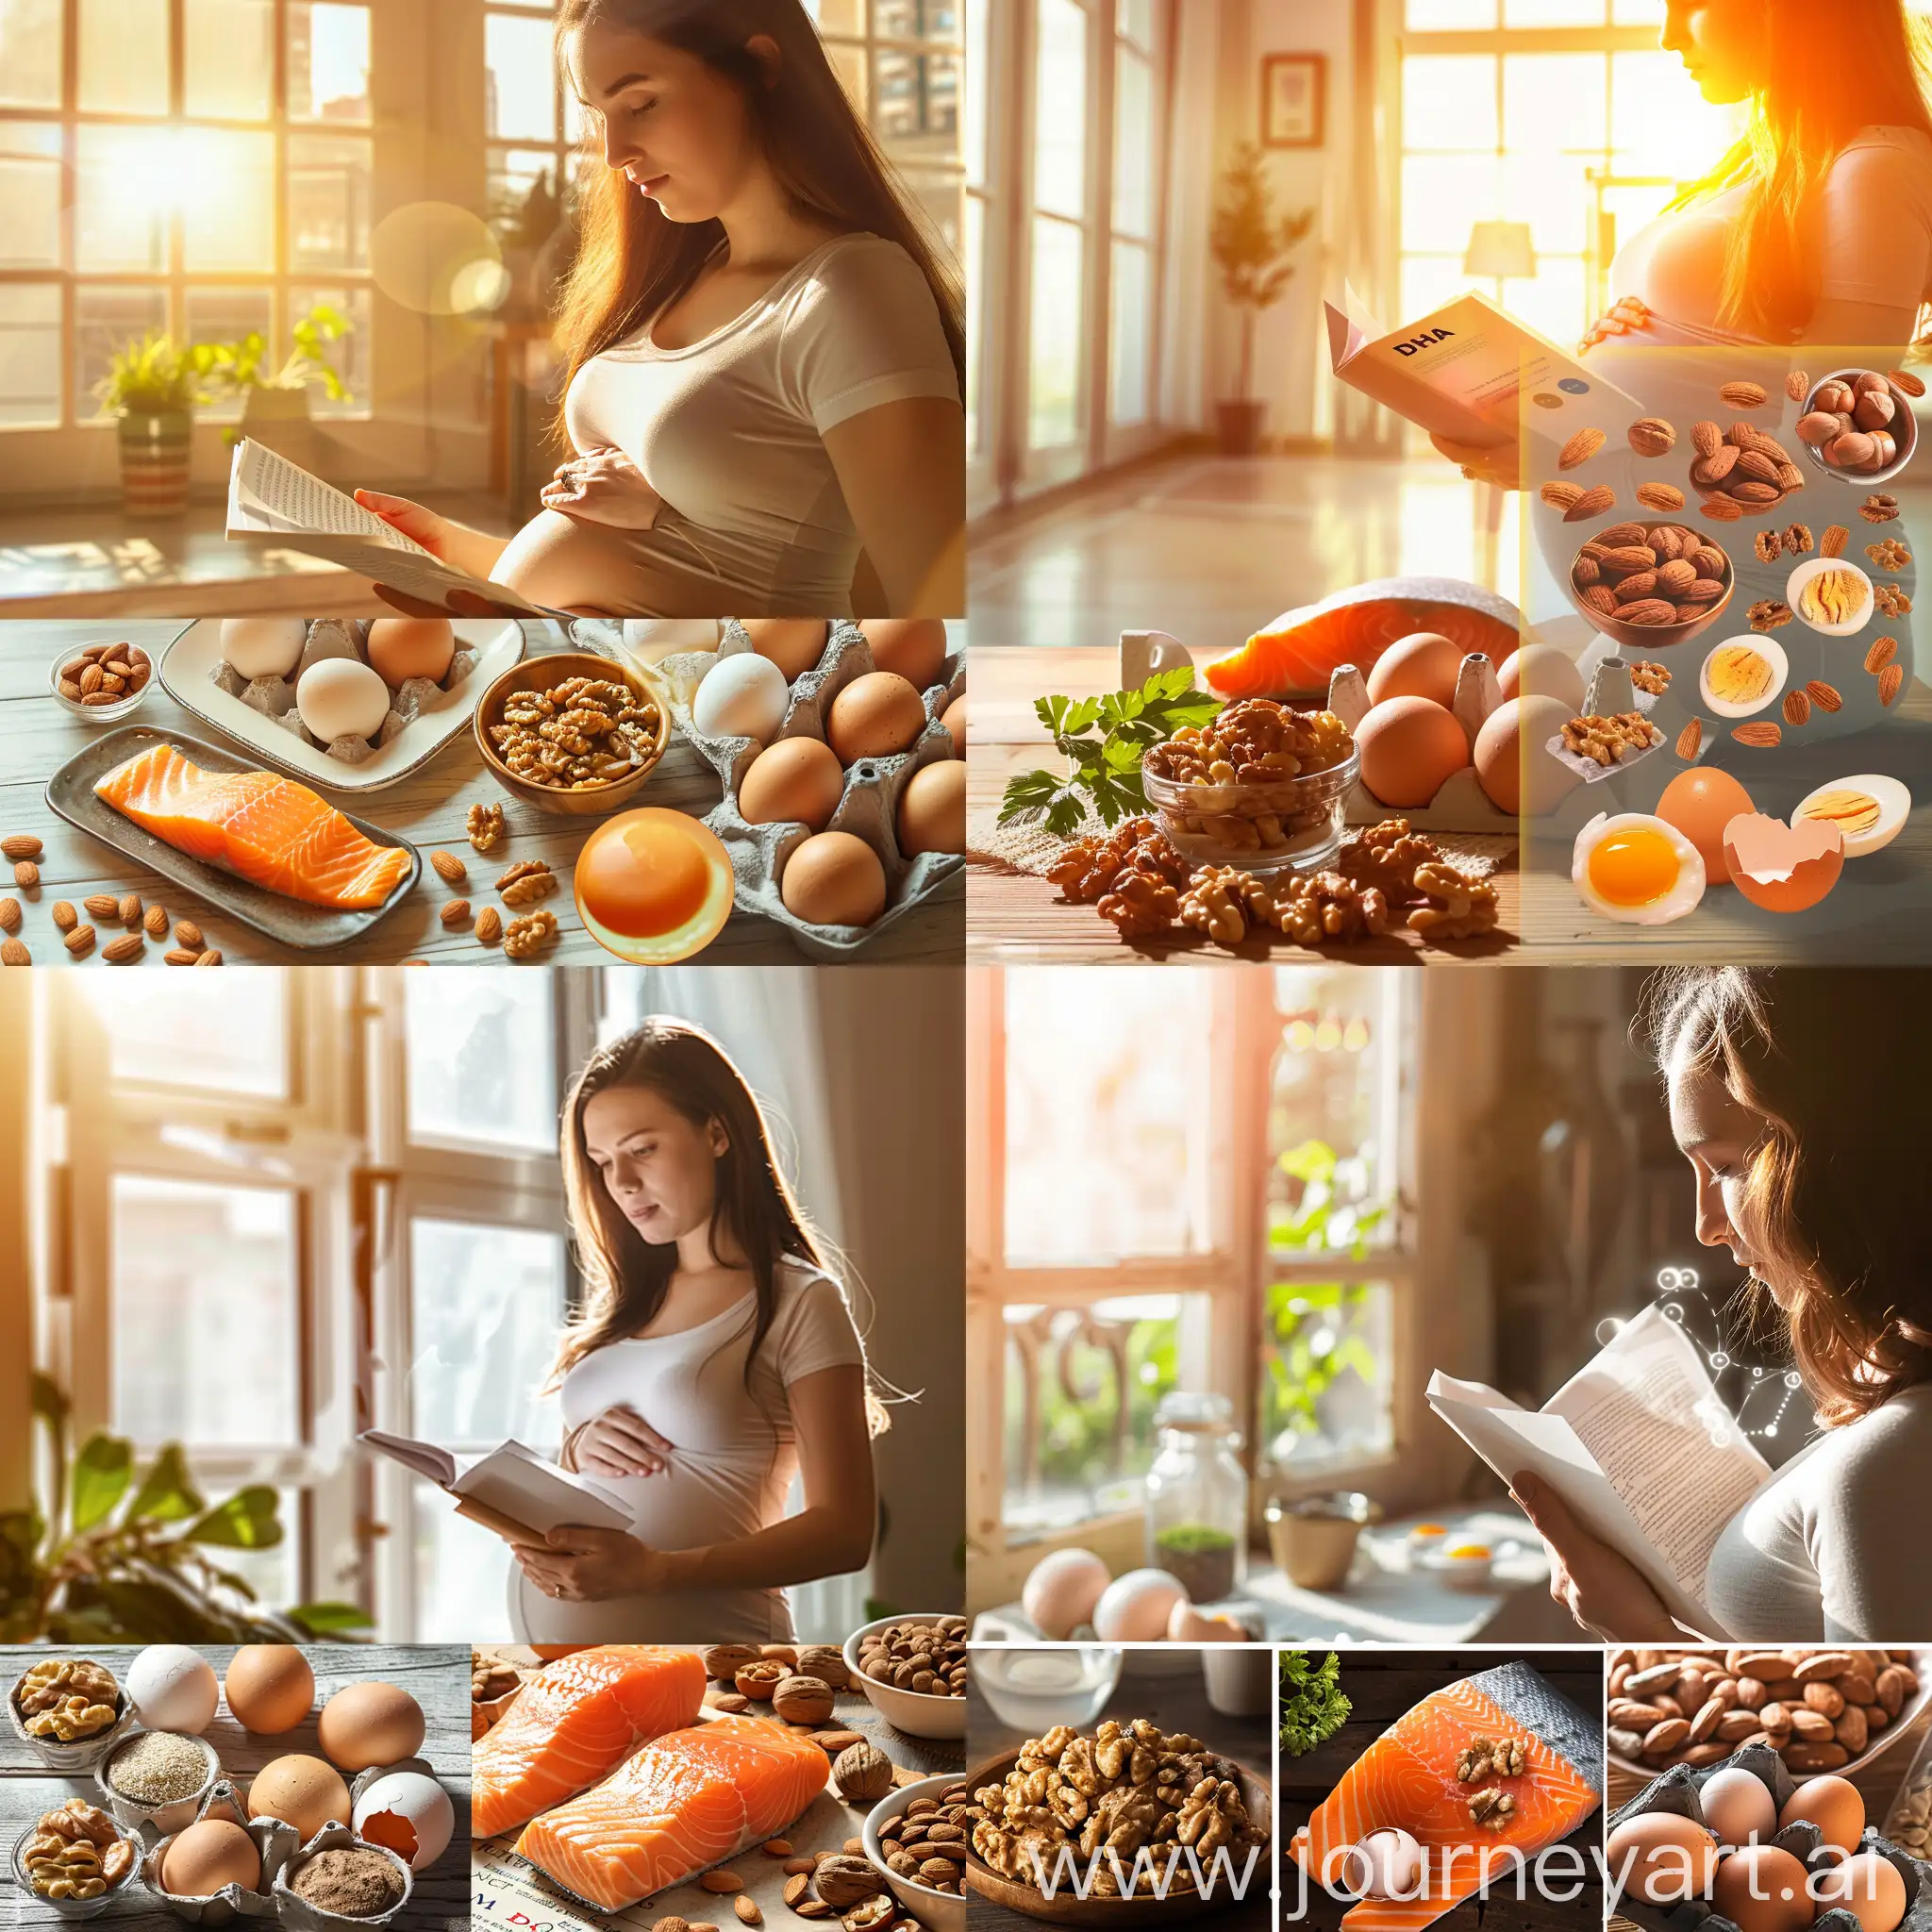 Pregnant-Woman-Reading-about-DHA-Benefits-Surrounded-by-Omega3-Rich-Foods